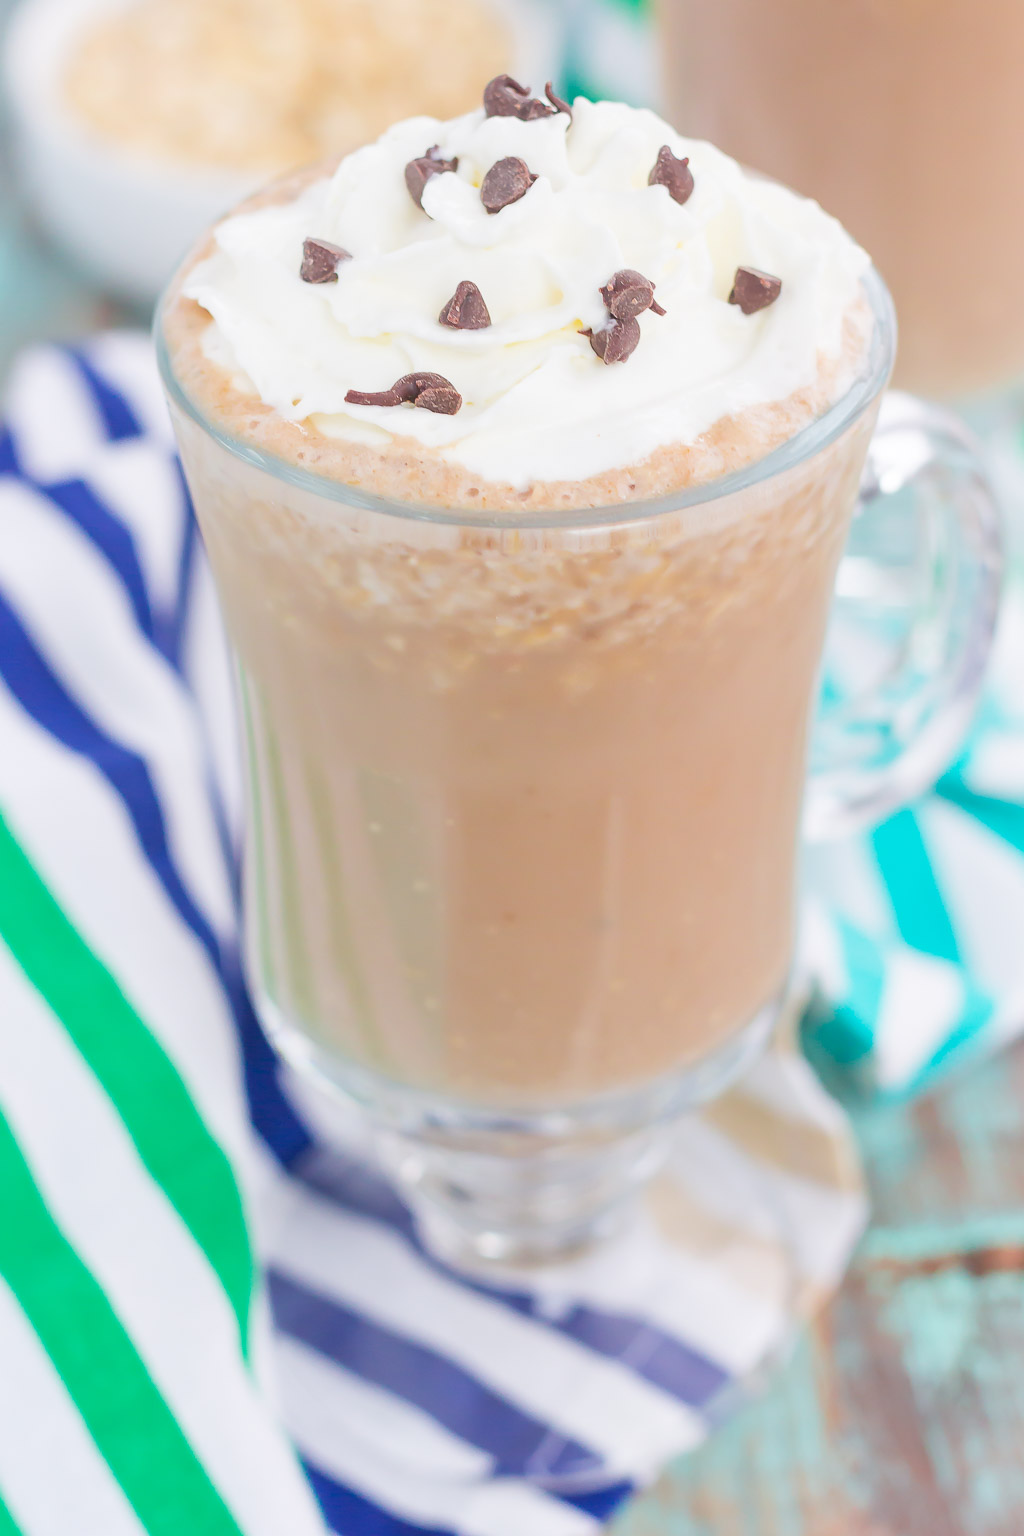 This Iced Coffee Smoothie is the perfect way to get your morning off to a good start. Packed with coffee, oats, honey, and a banana, this healthier drink takes just minutes to make and will keep you going all day long! #coffee #icedcoffee #smoothie #coffeesmoothie #icedcoffeesmoothie #drink